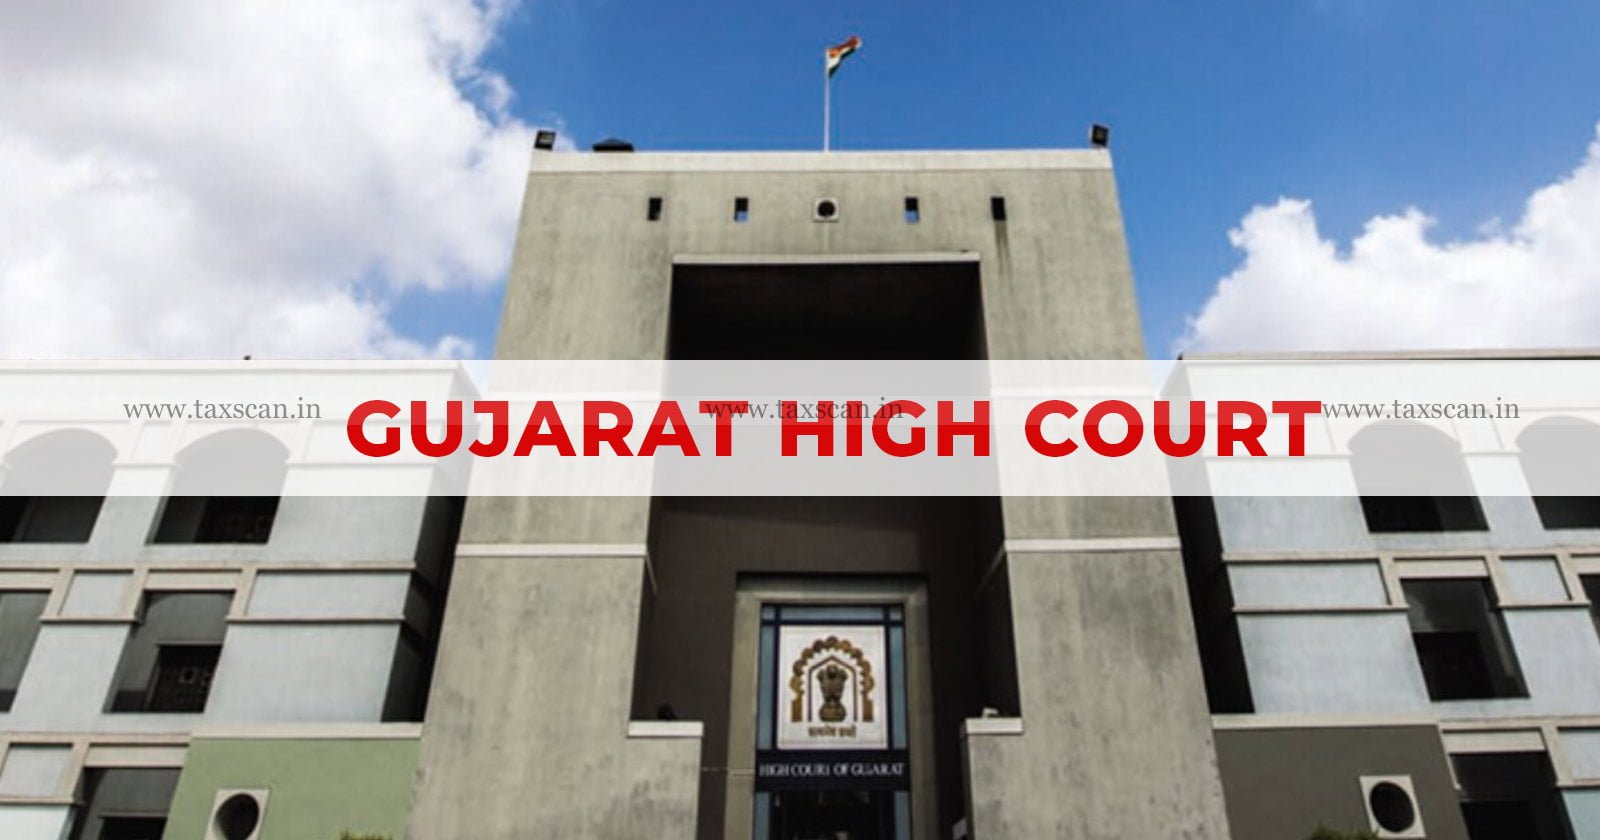 Statutory Limitation - SCN - Gujarat High Court - SCN extension - Final order restrictions - Show Cause Notice time limit - CGST - taxscan